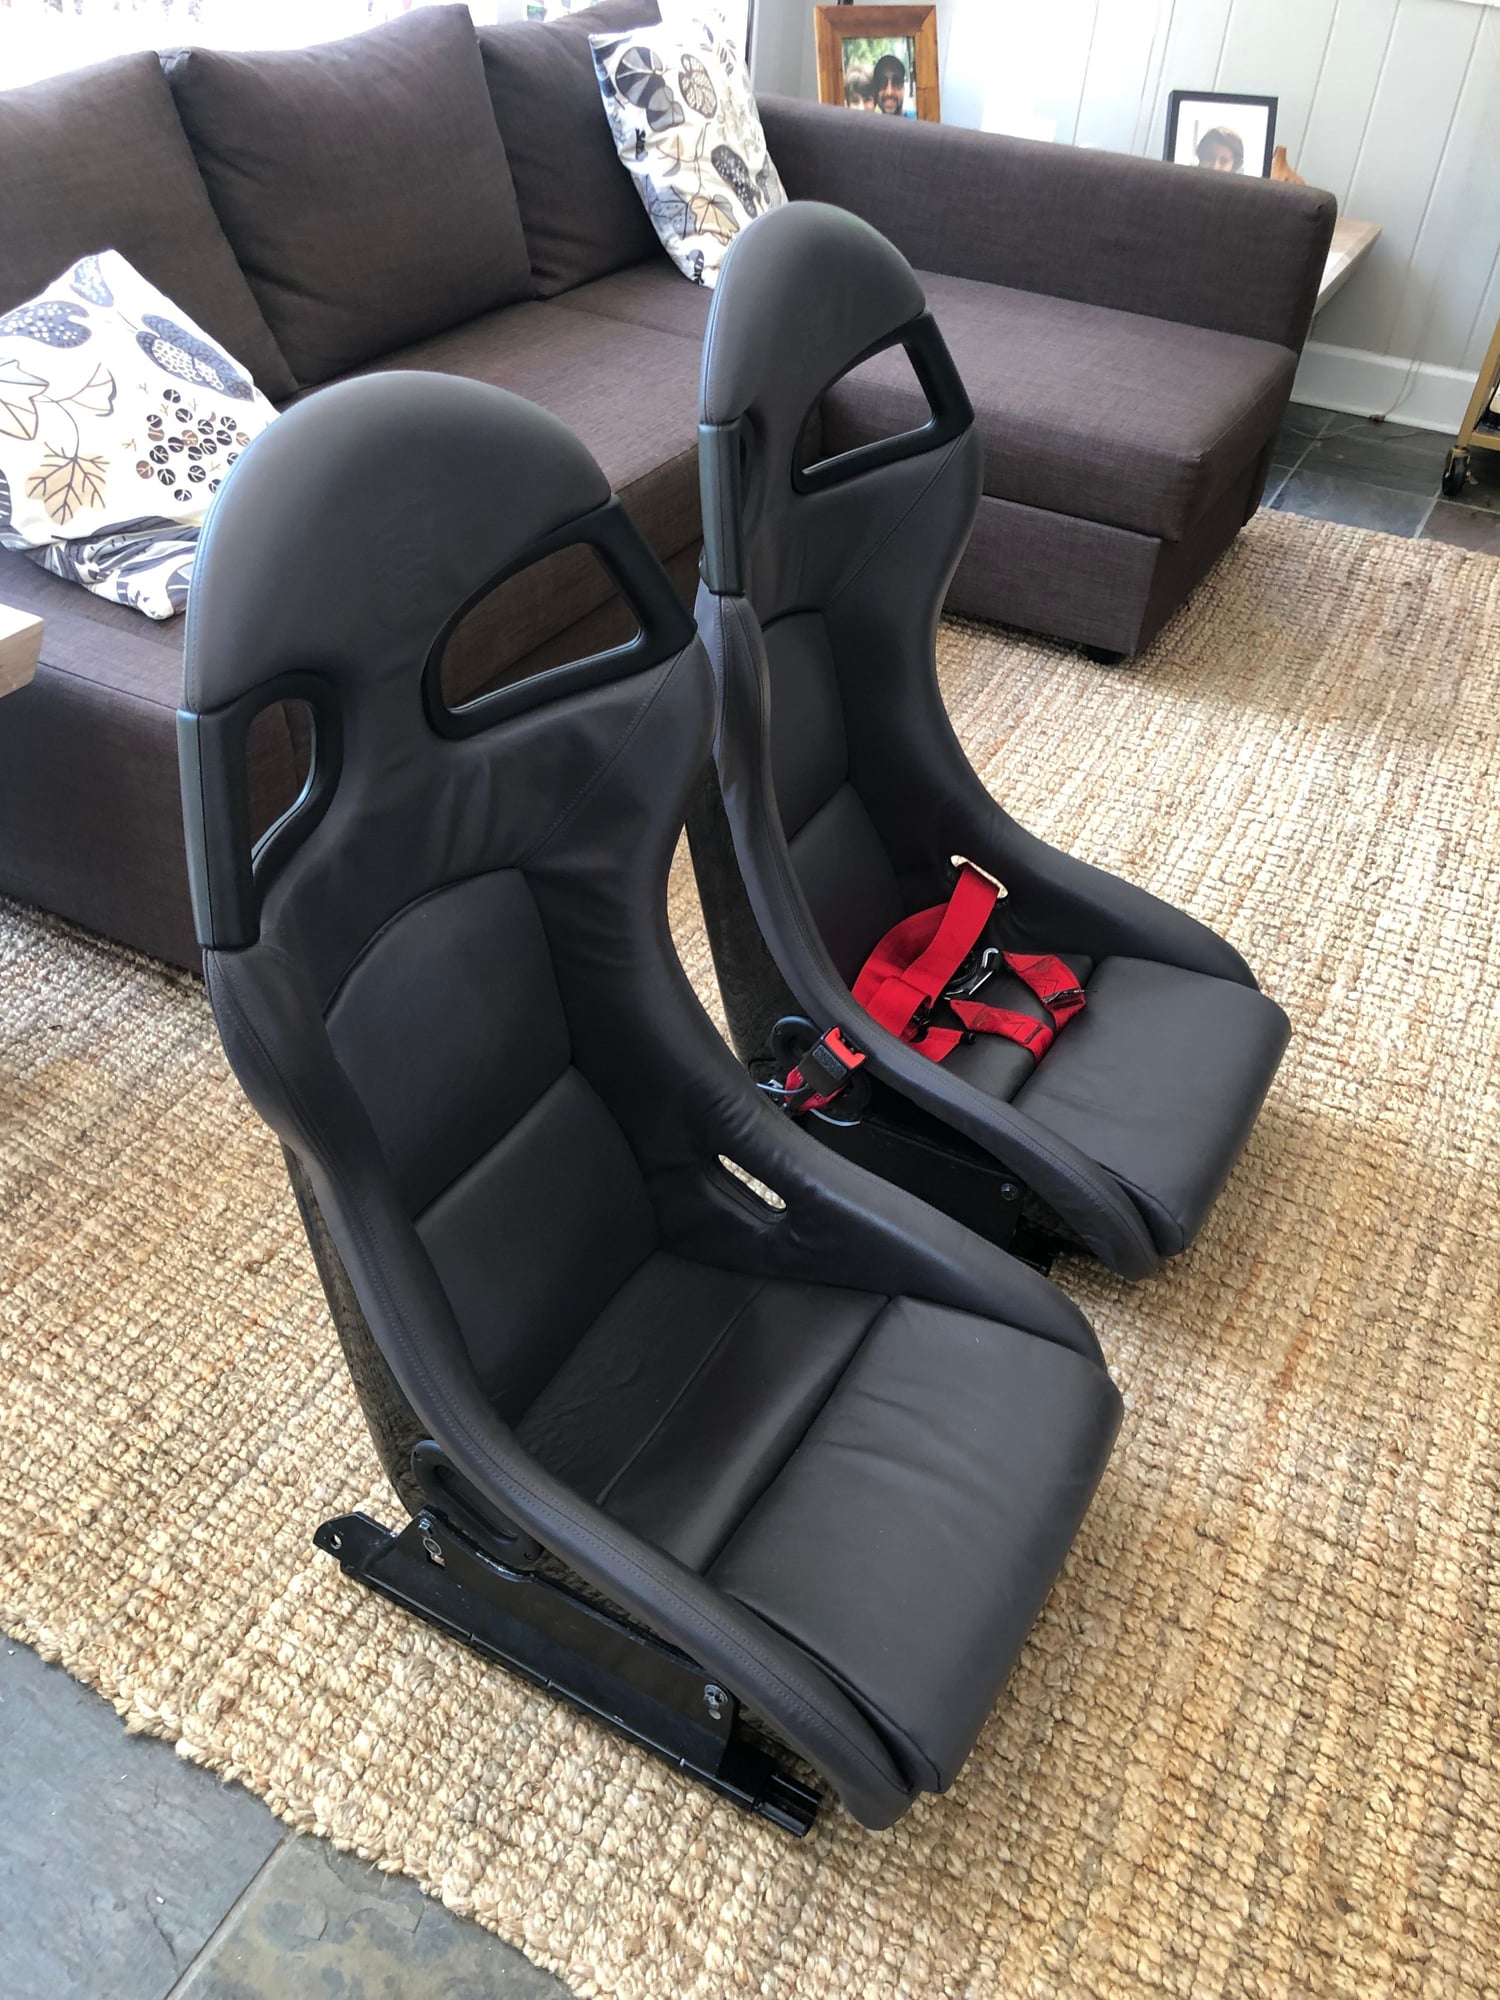 Interior/Upholstery - Recaro GT3 seats with 993 rails - Used - 2011 to 2017 Porsche 911 - Naples, FL 34103, United States